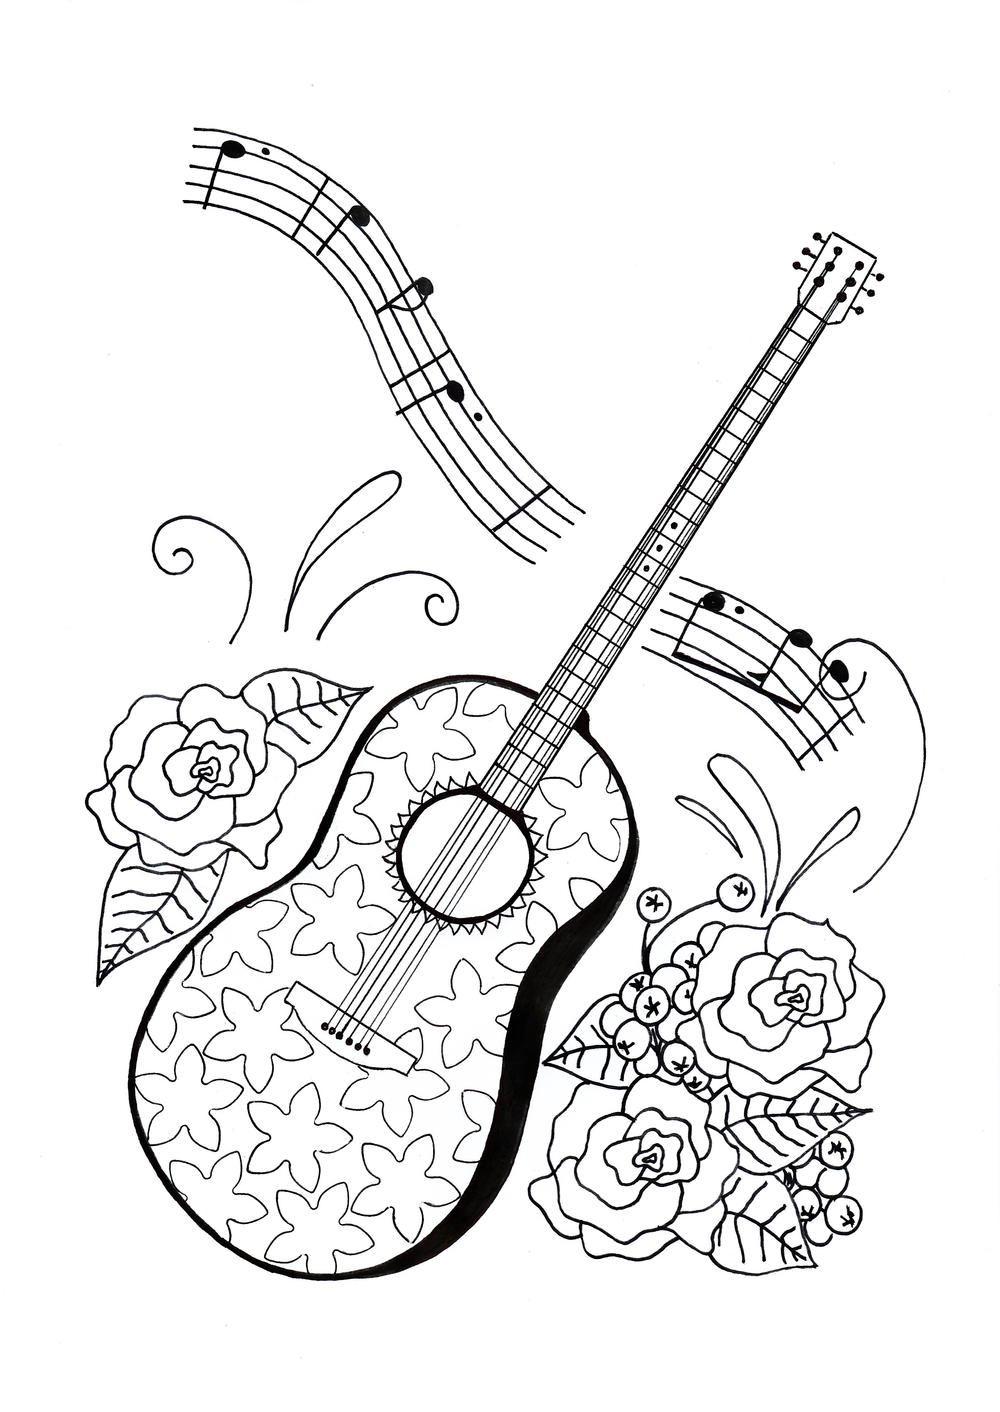 Download For the Love of Music Adult Coloring Page | FaveCrafts.com